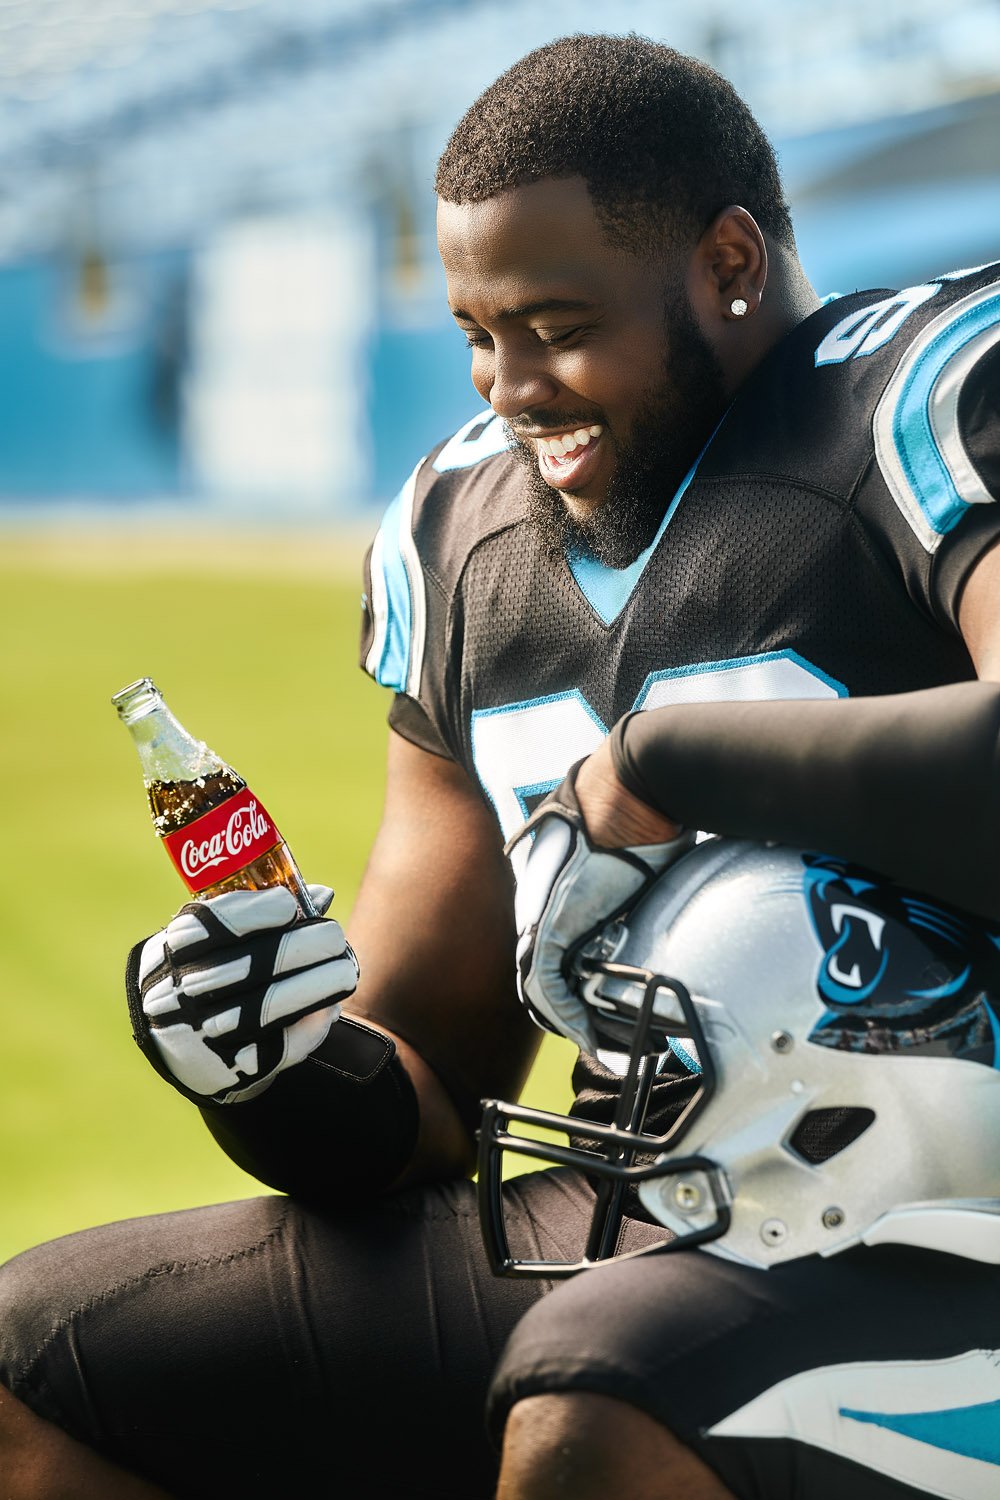 A Carolina Panthers football player looking affectionately at an ice-cold glass bottle of Coca-Cola